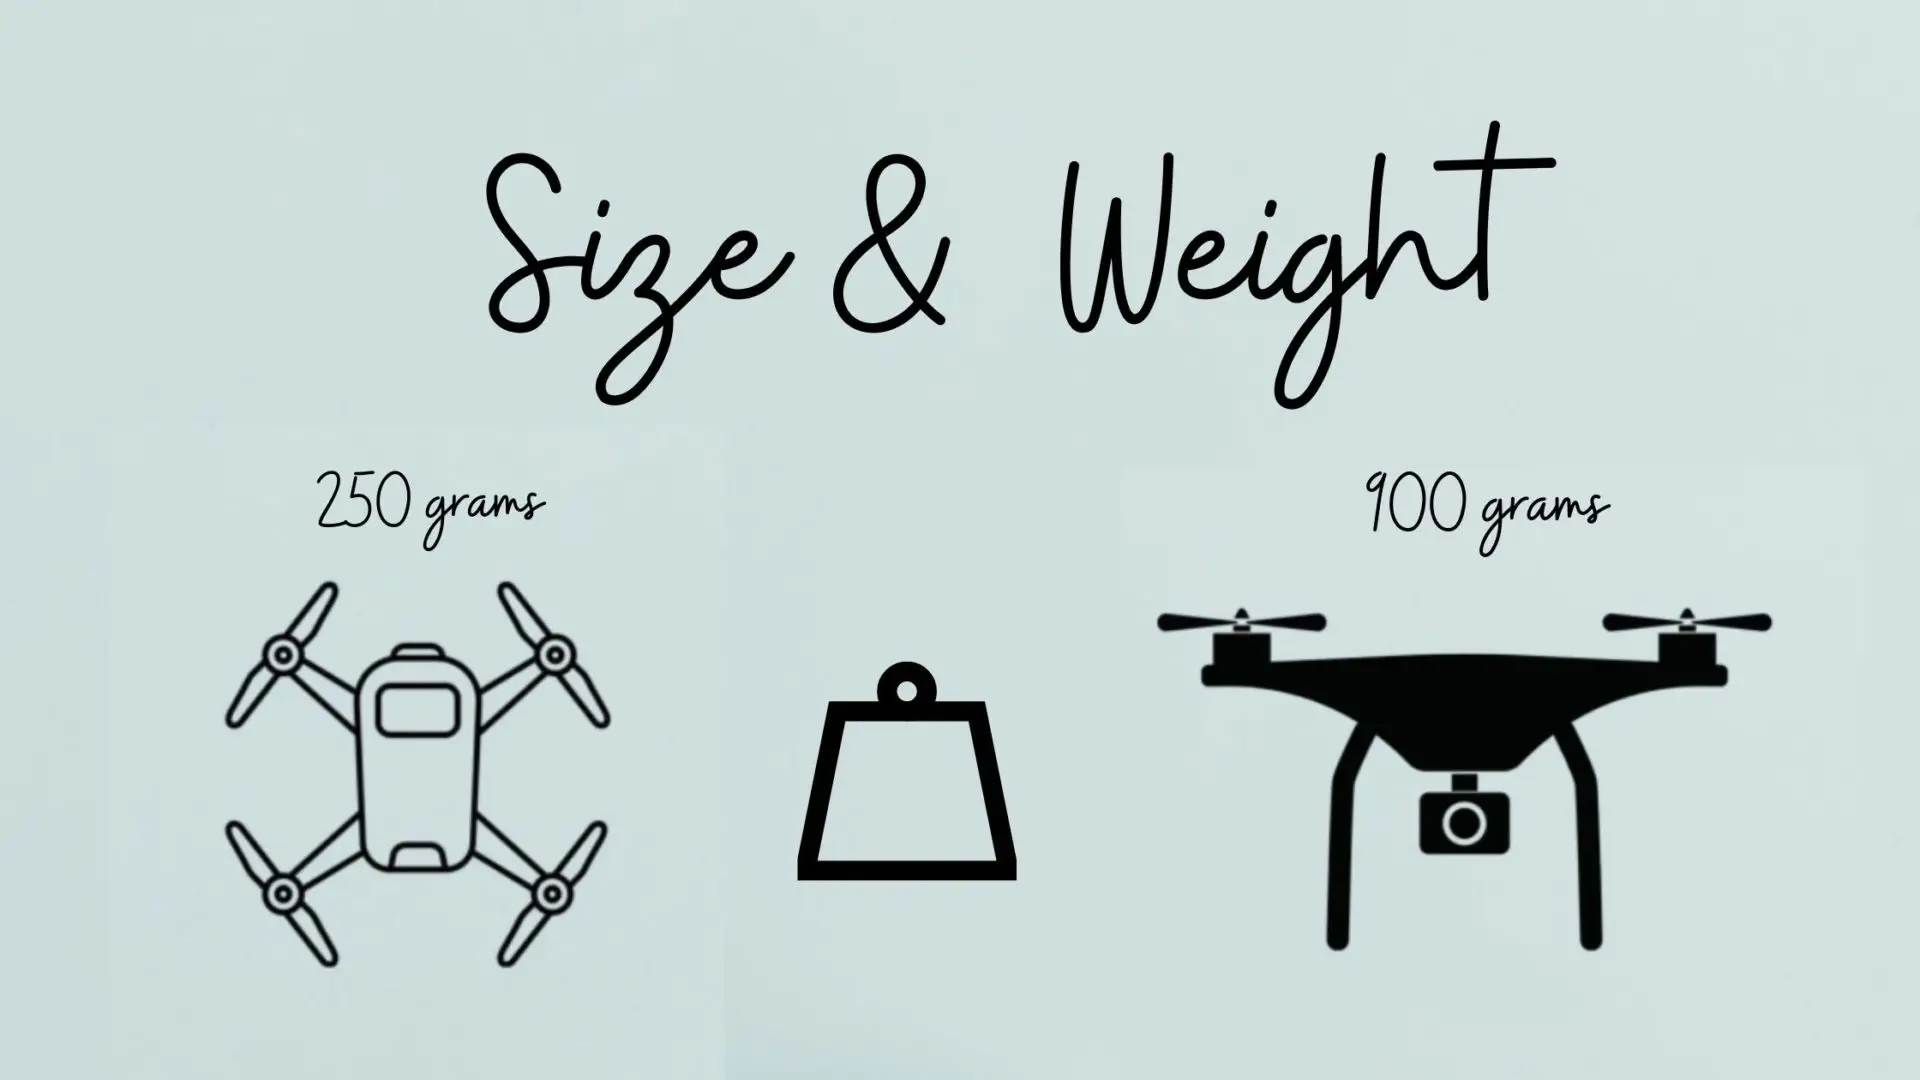 Mini drone size and weight